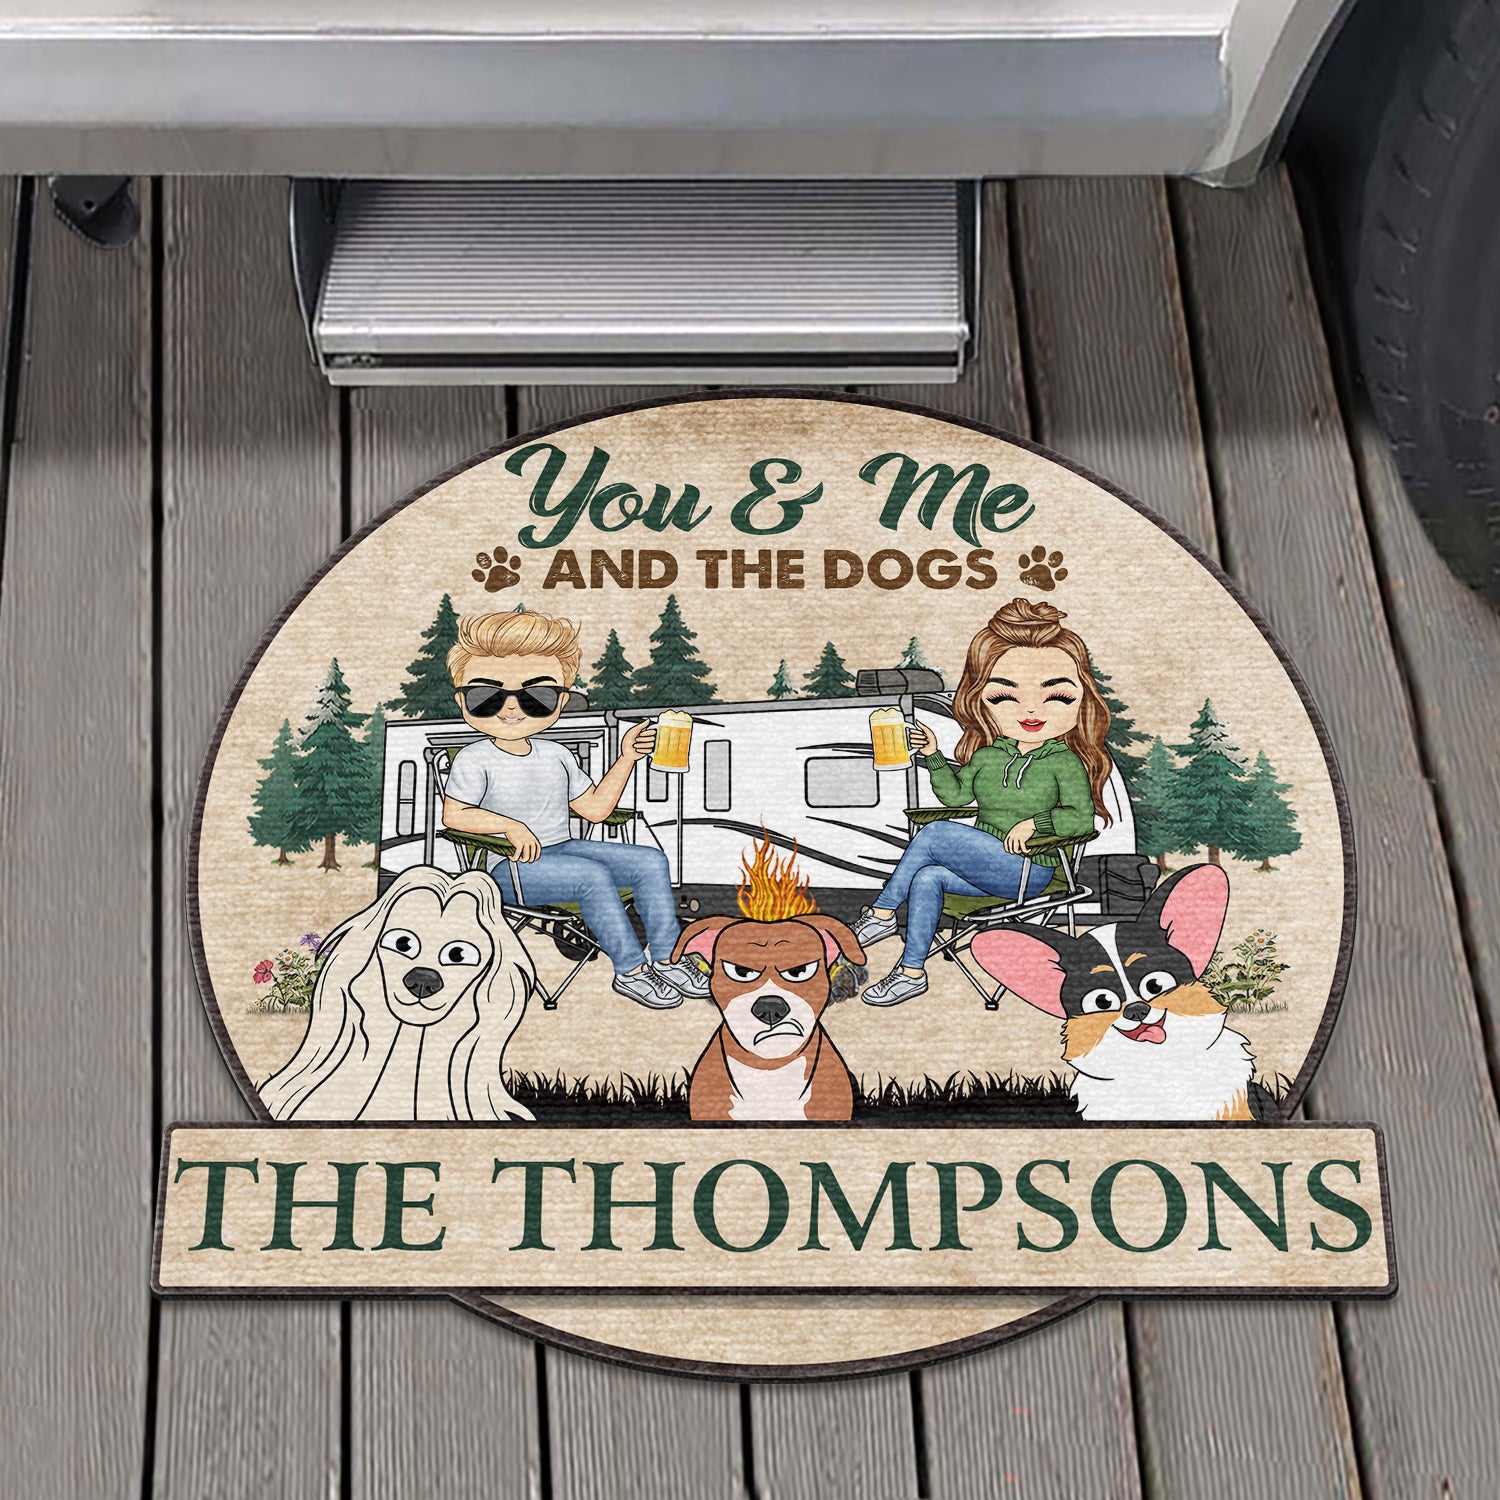 You & Me And The Dogs Cats - Gift For Camping Couples, Pet Lovers - Personalized Custom Shaped Doormat